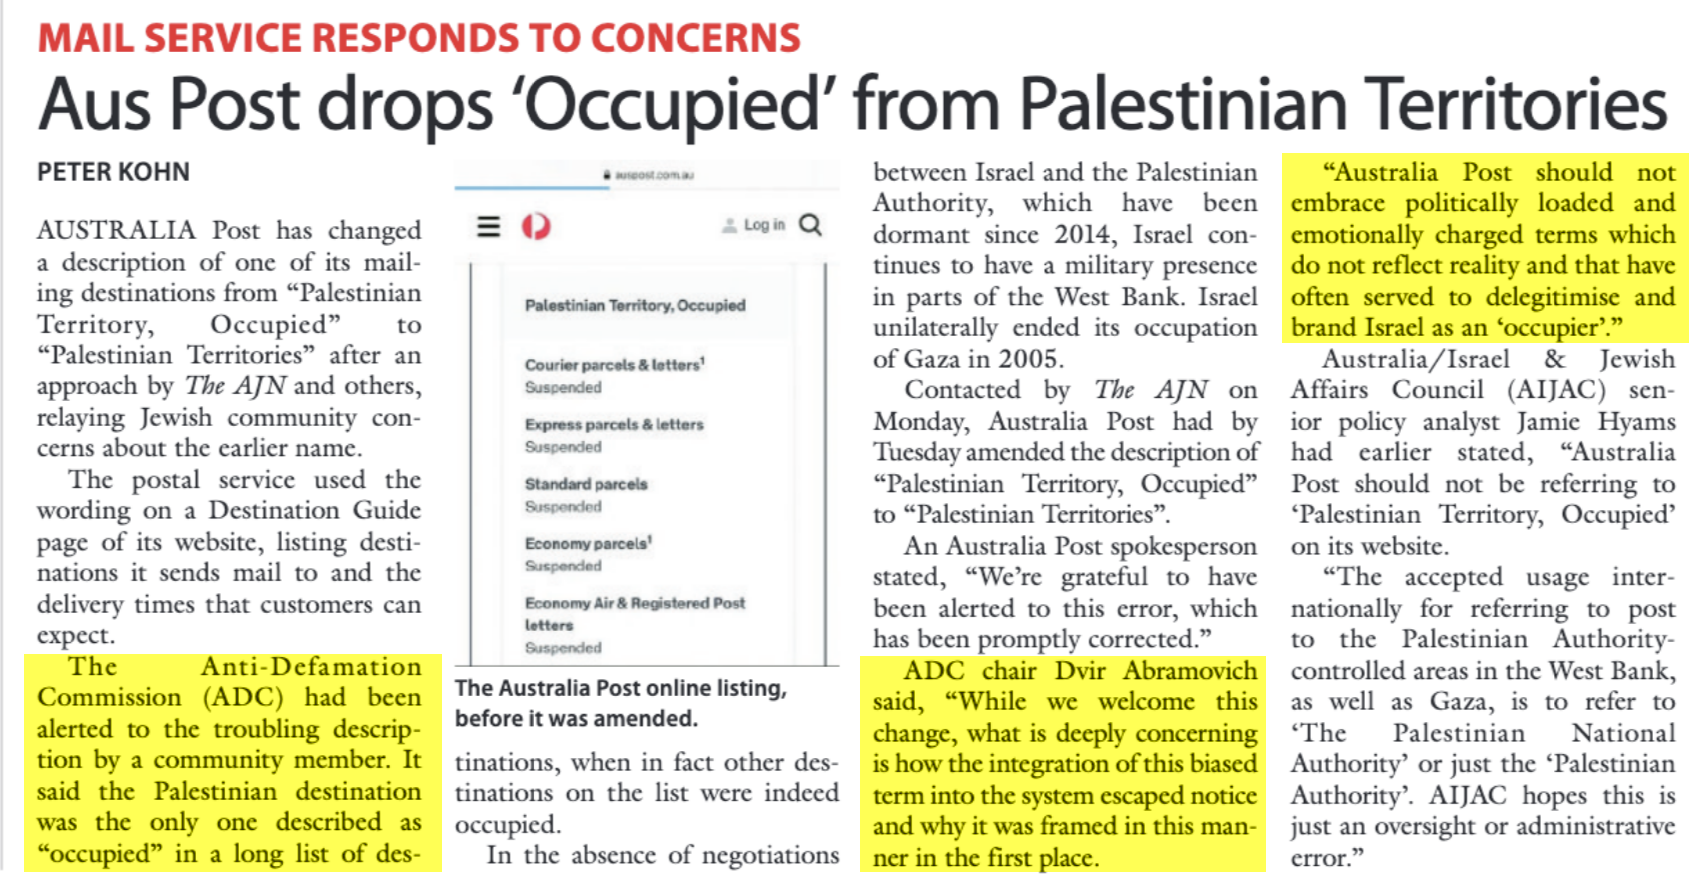 Australia Post drops ‘Occupied’ from Palestinian Territories after ADC intervention